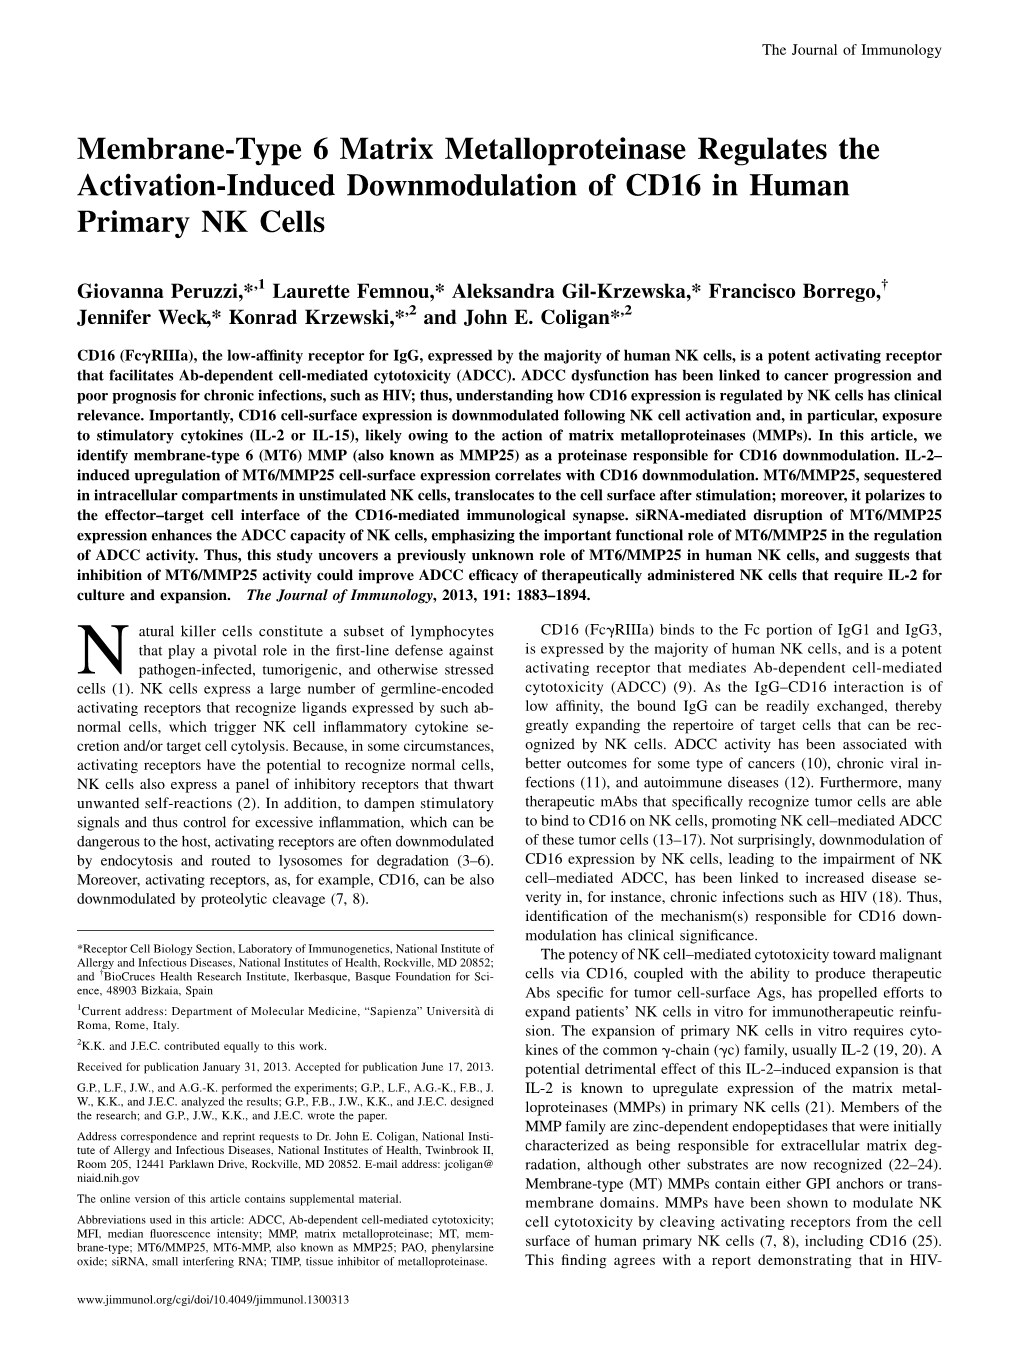 NK Cells Downmodulation of CD16 in Human Primary Regulates The